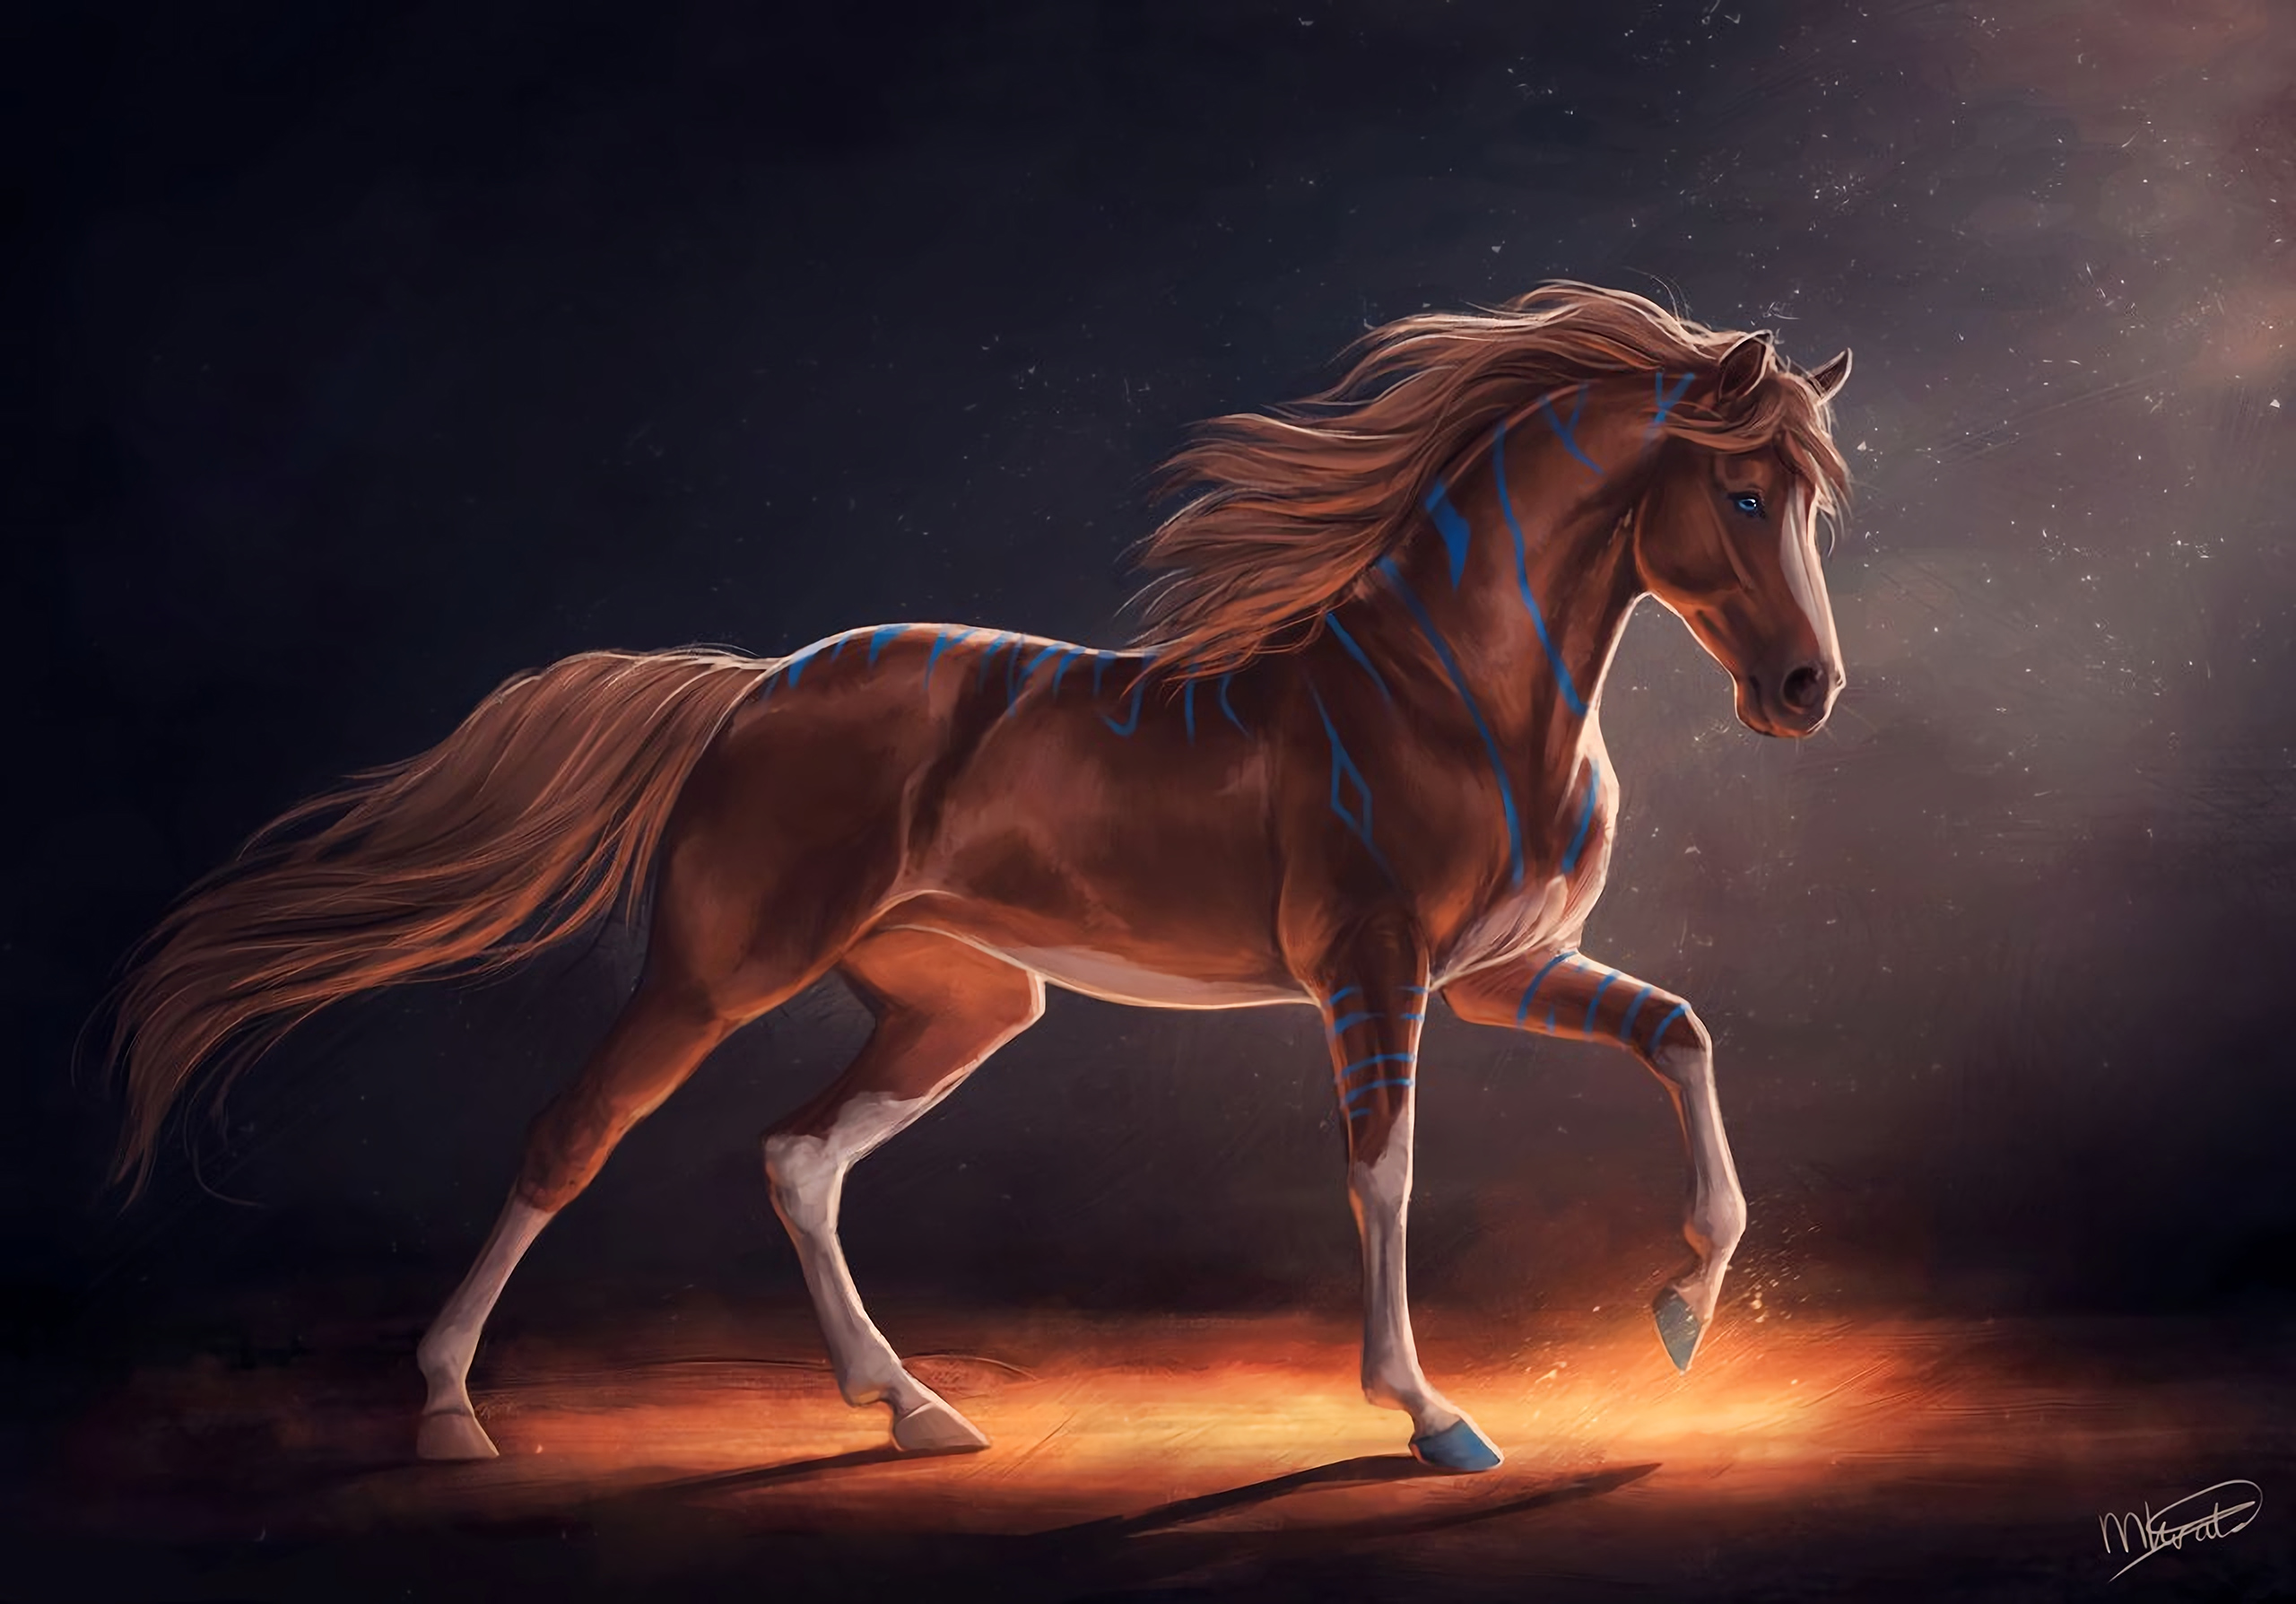 Horse Digital Art, HD Animals, 4k Wallpapers, Images, Backgrounds